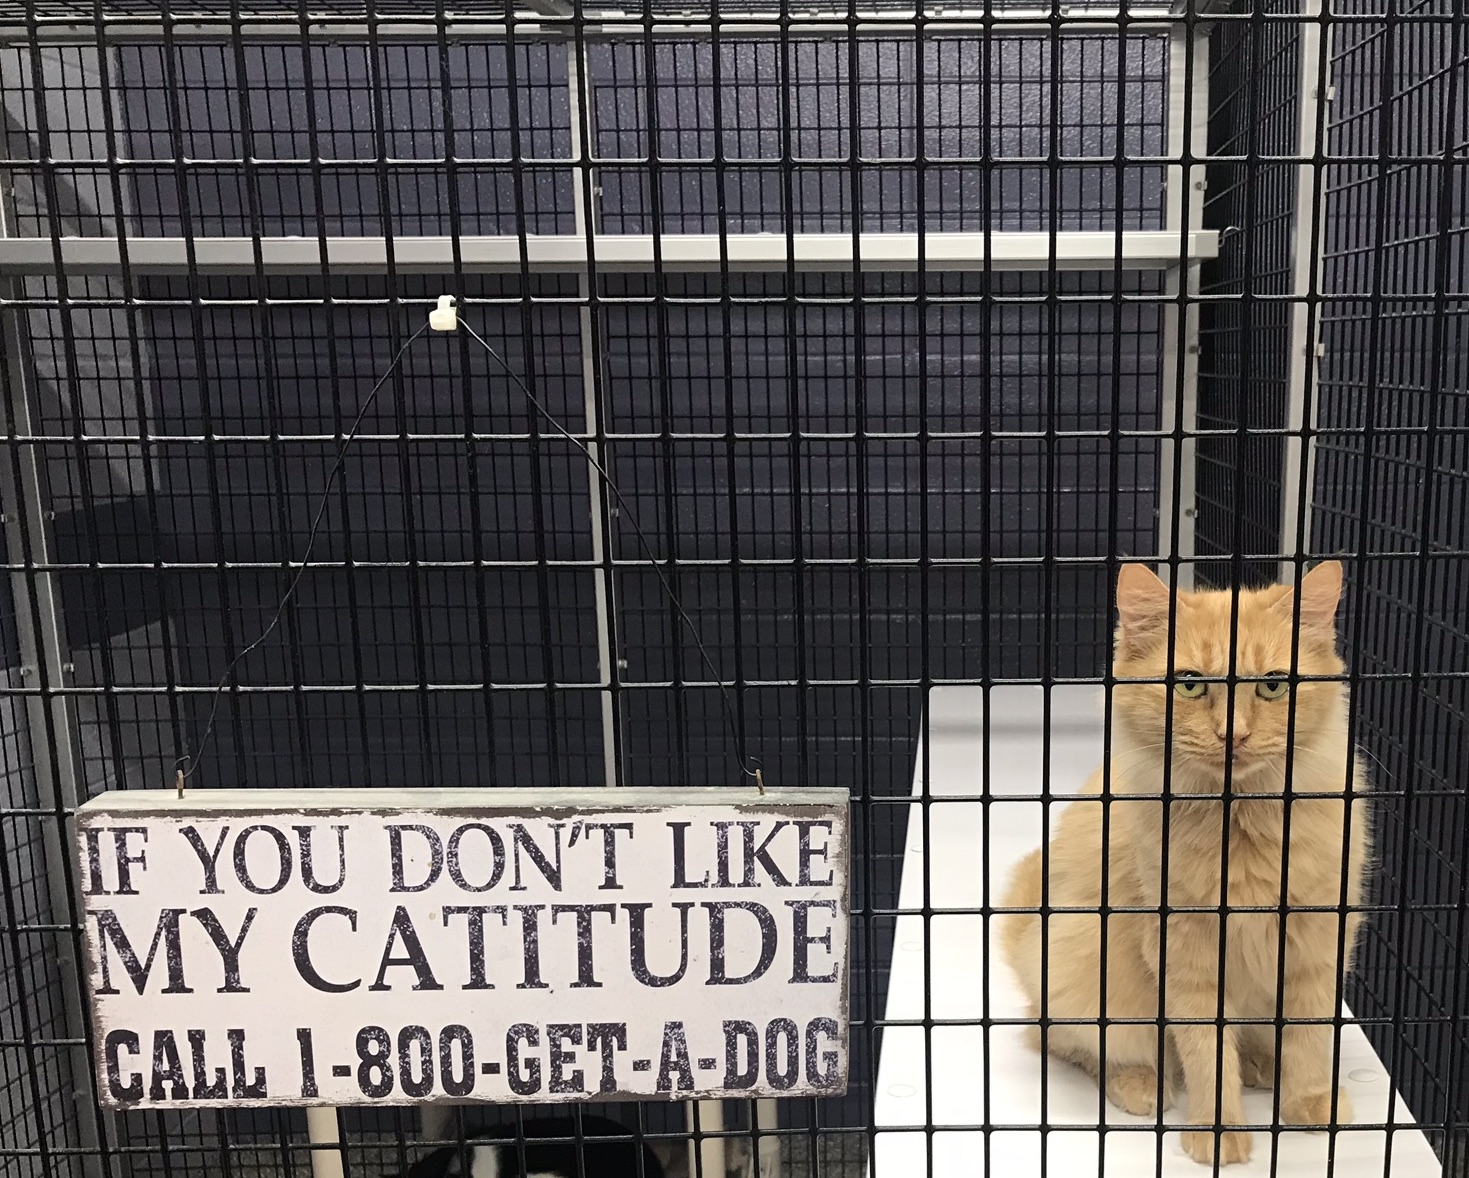 An orange adult cat sits on a shelf inside a large wire enclosure. He appears alert and neutral as he looks out of the enclosure towards the camera. Next to him is a decorative sign hanging on the outside of his enclosure that reads, “If you don’t like my catitude, call 1-800-get-a-dog.”